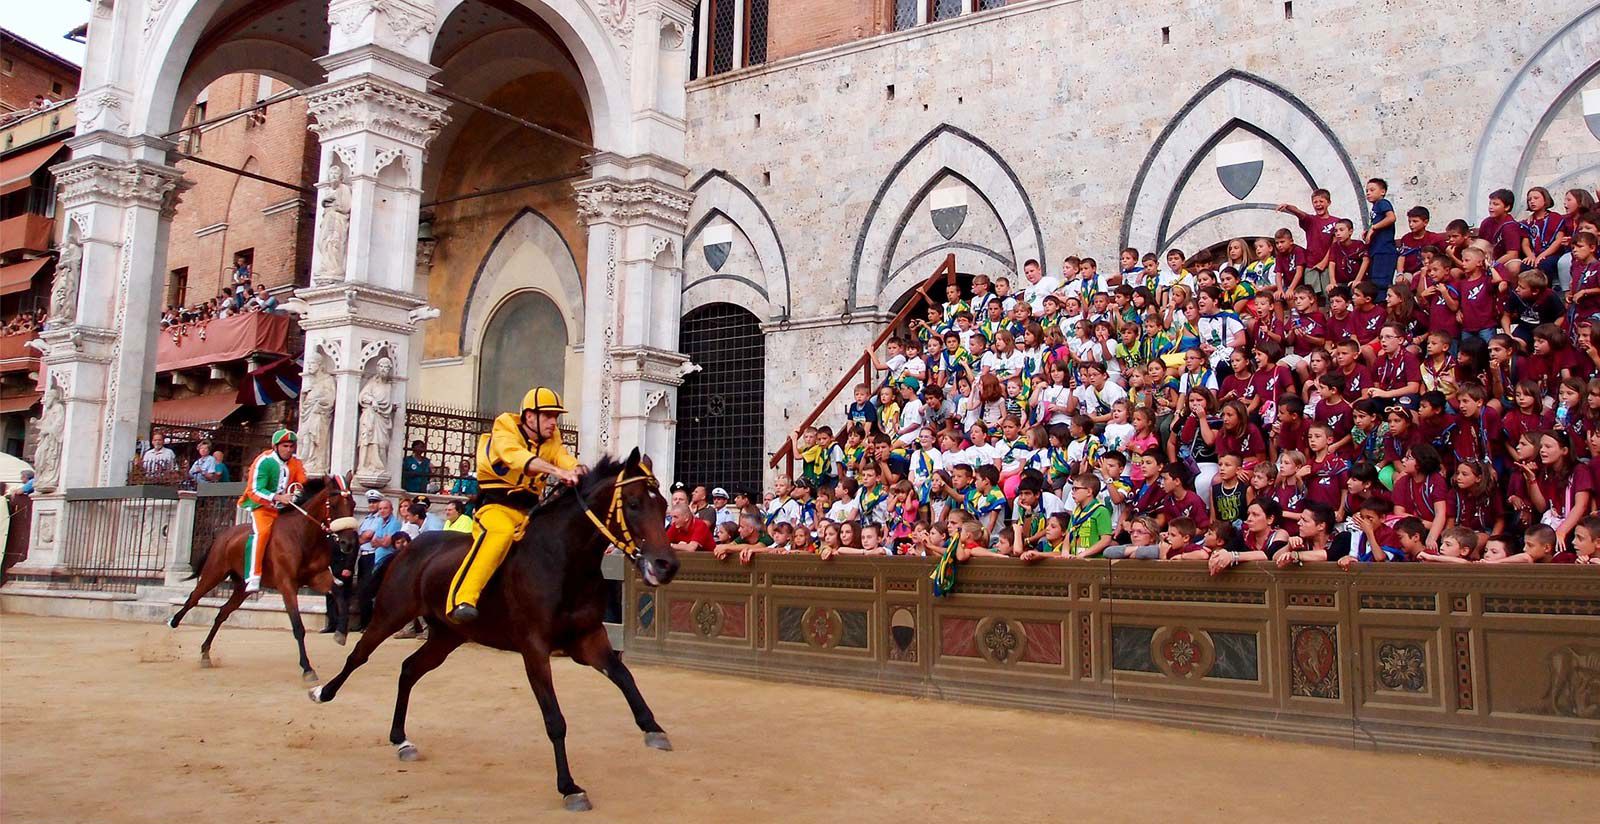 Grand Hotel Imperiale - Siena's Art and Palio 2